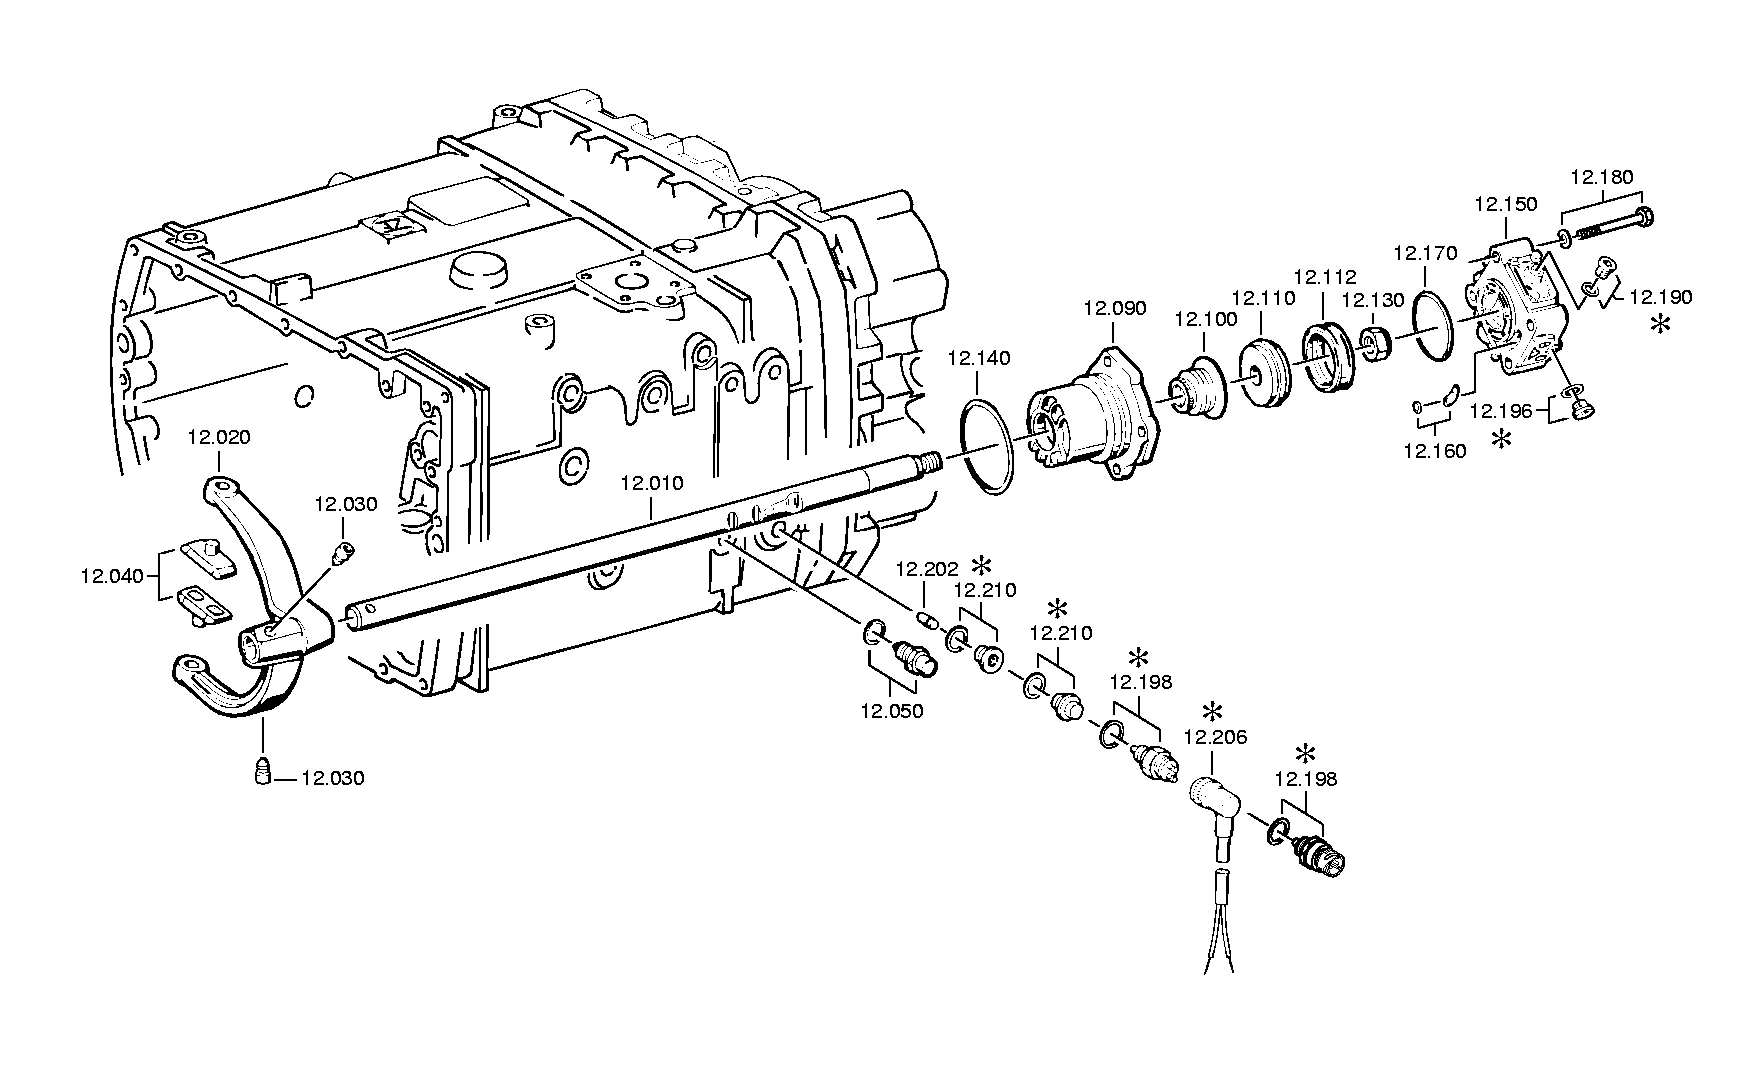 drawing for DAF 692684 - 5/2 WAY VALVE (figure 4)